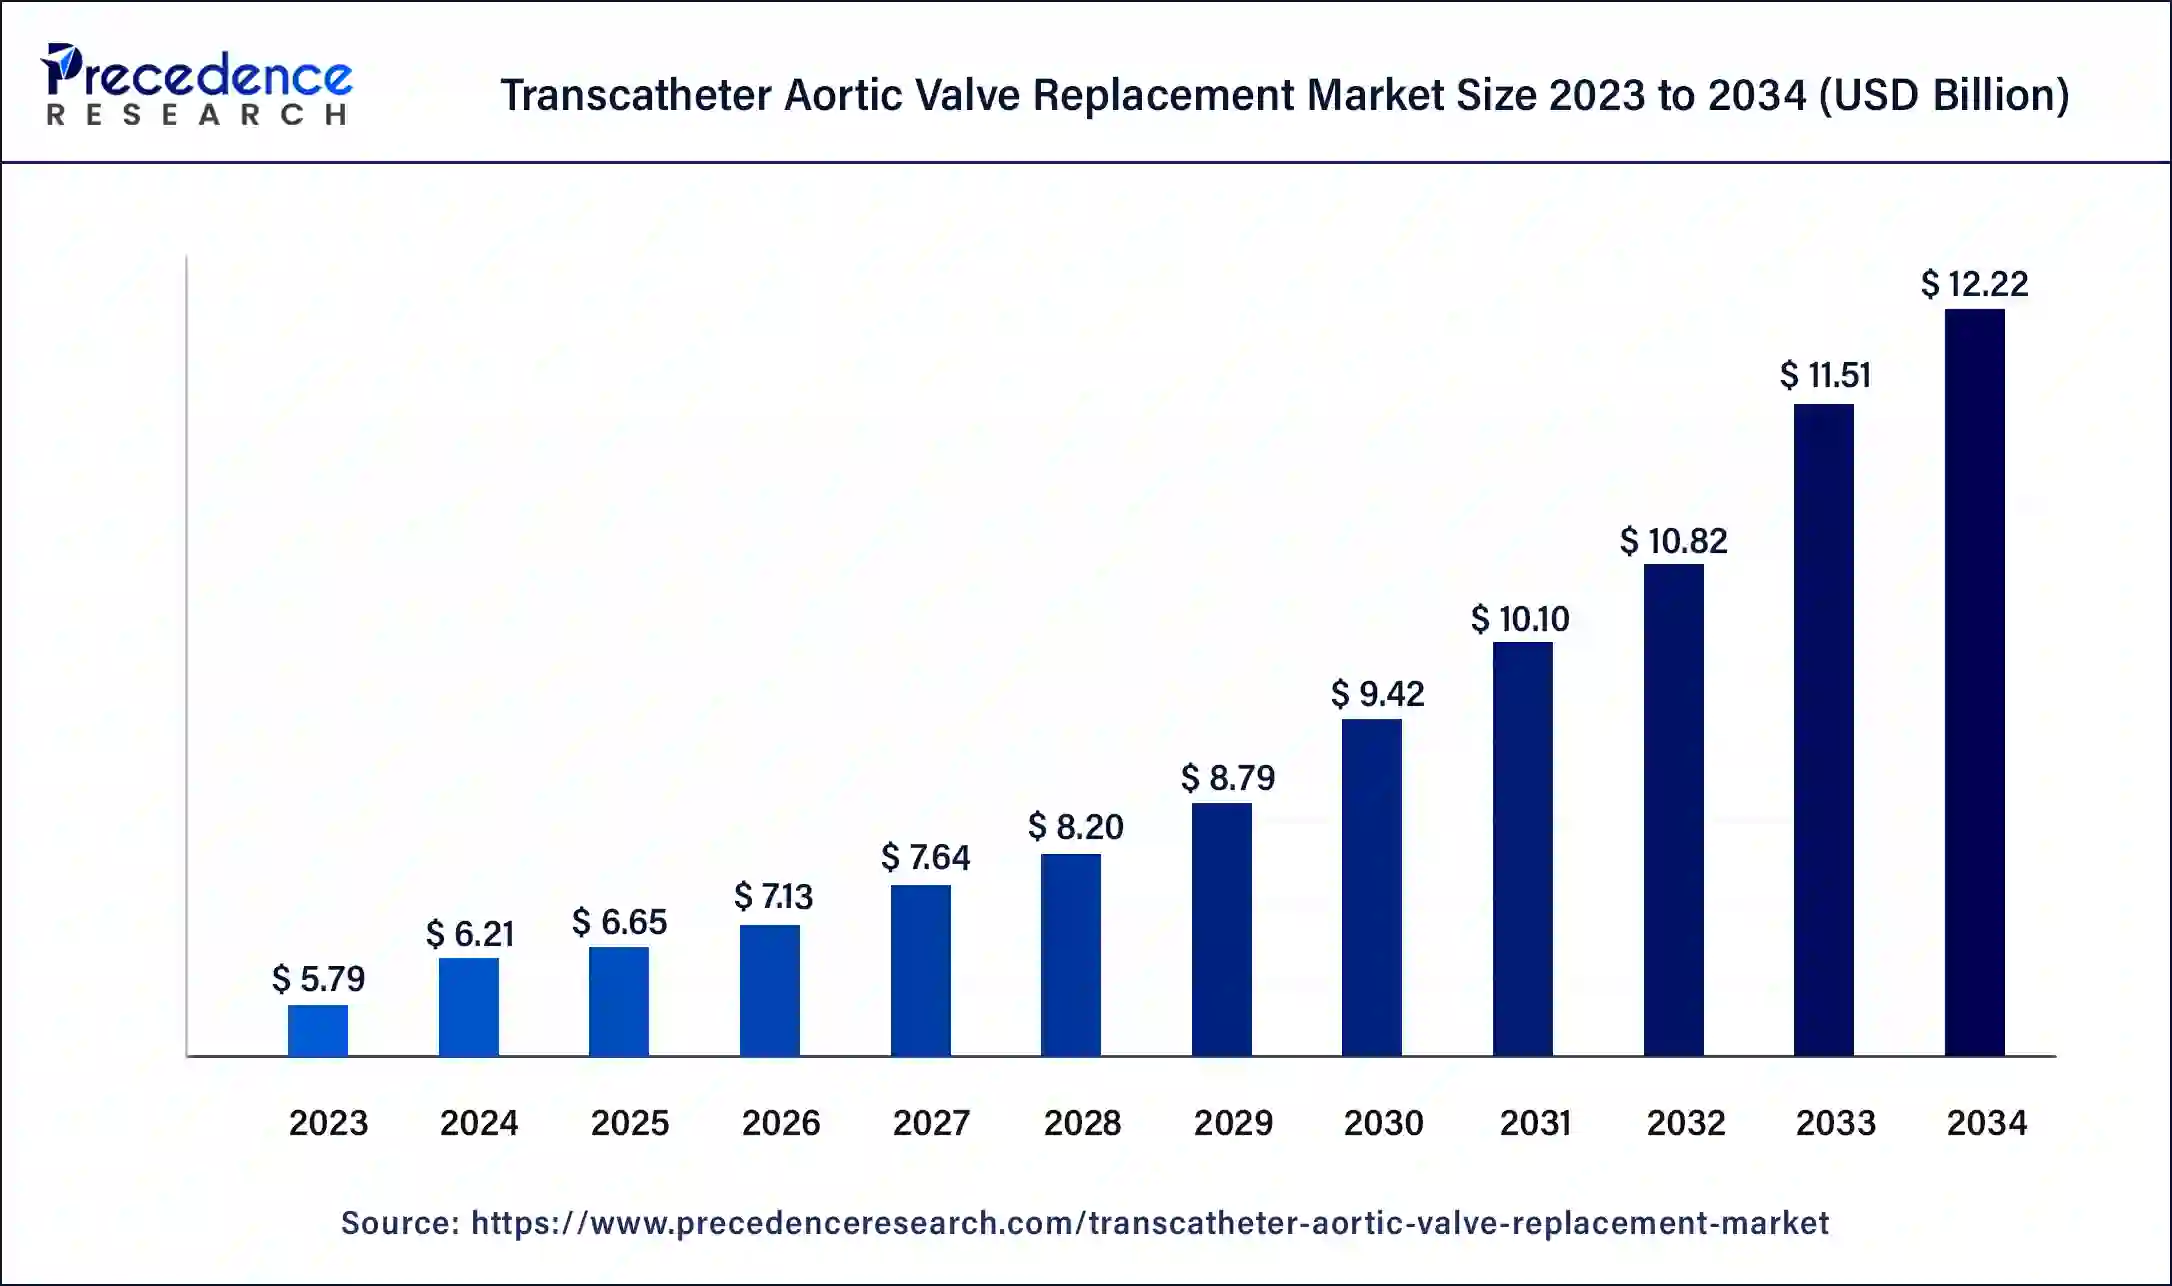 Transcatheter Aortic Valve Replacement Market Size 2024 To 2034